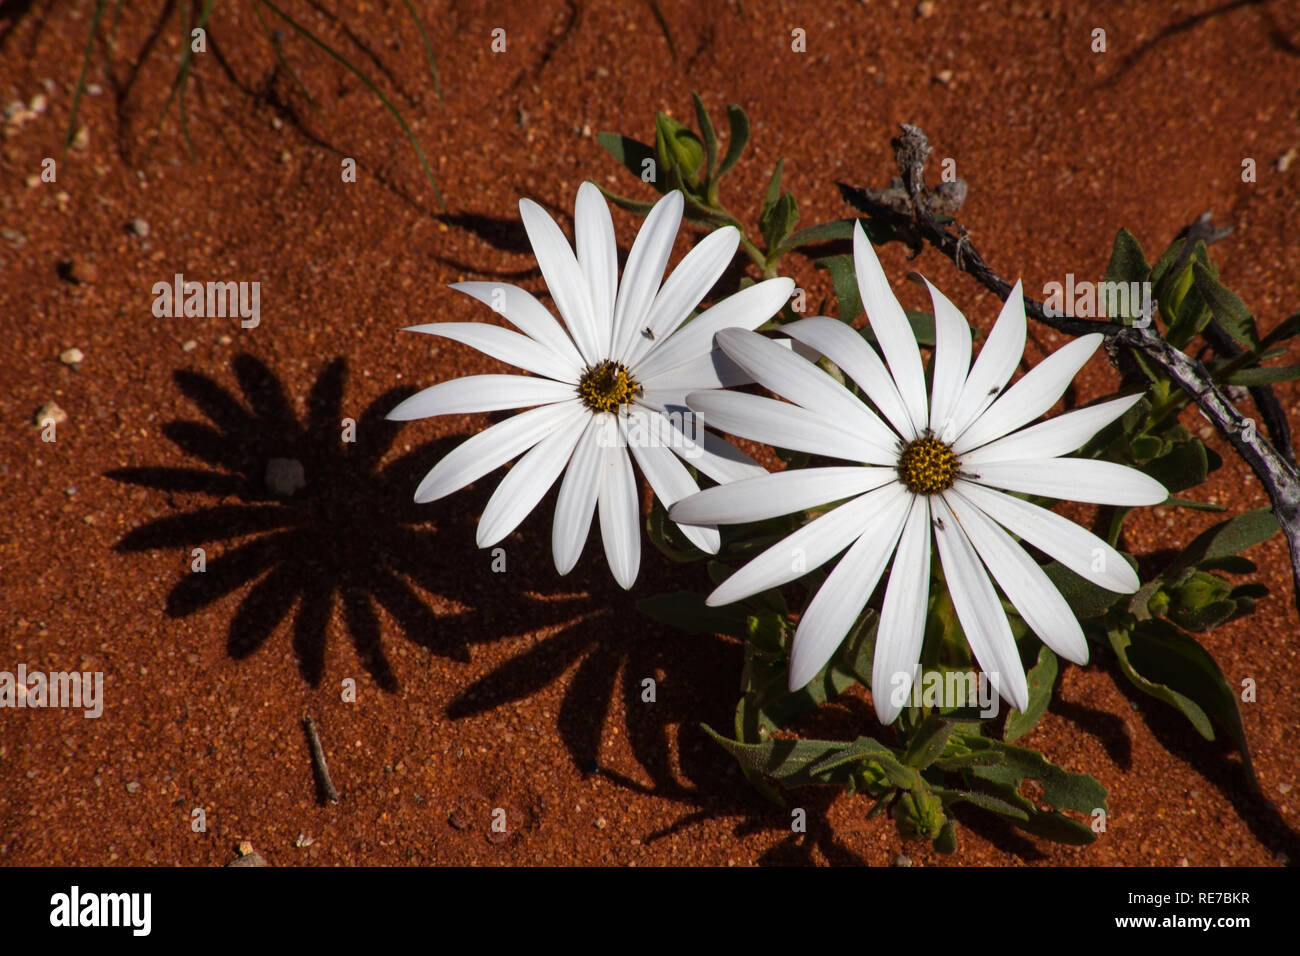 White Daisies on red sand Stock Photo